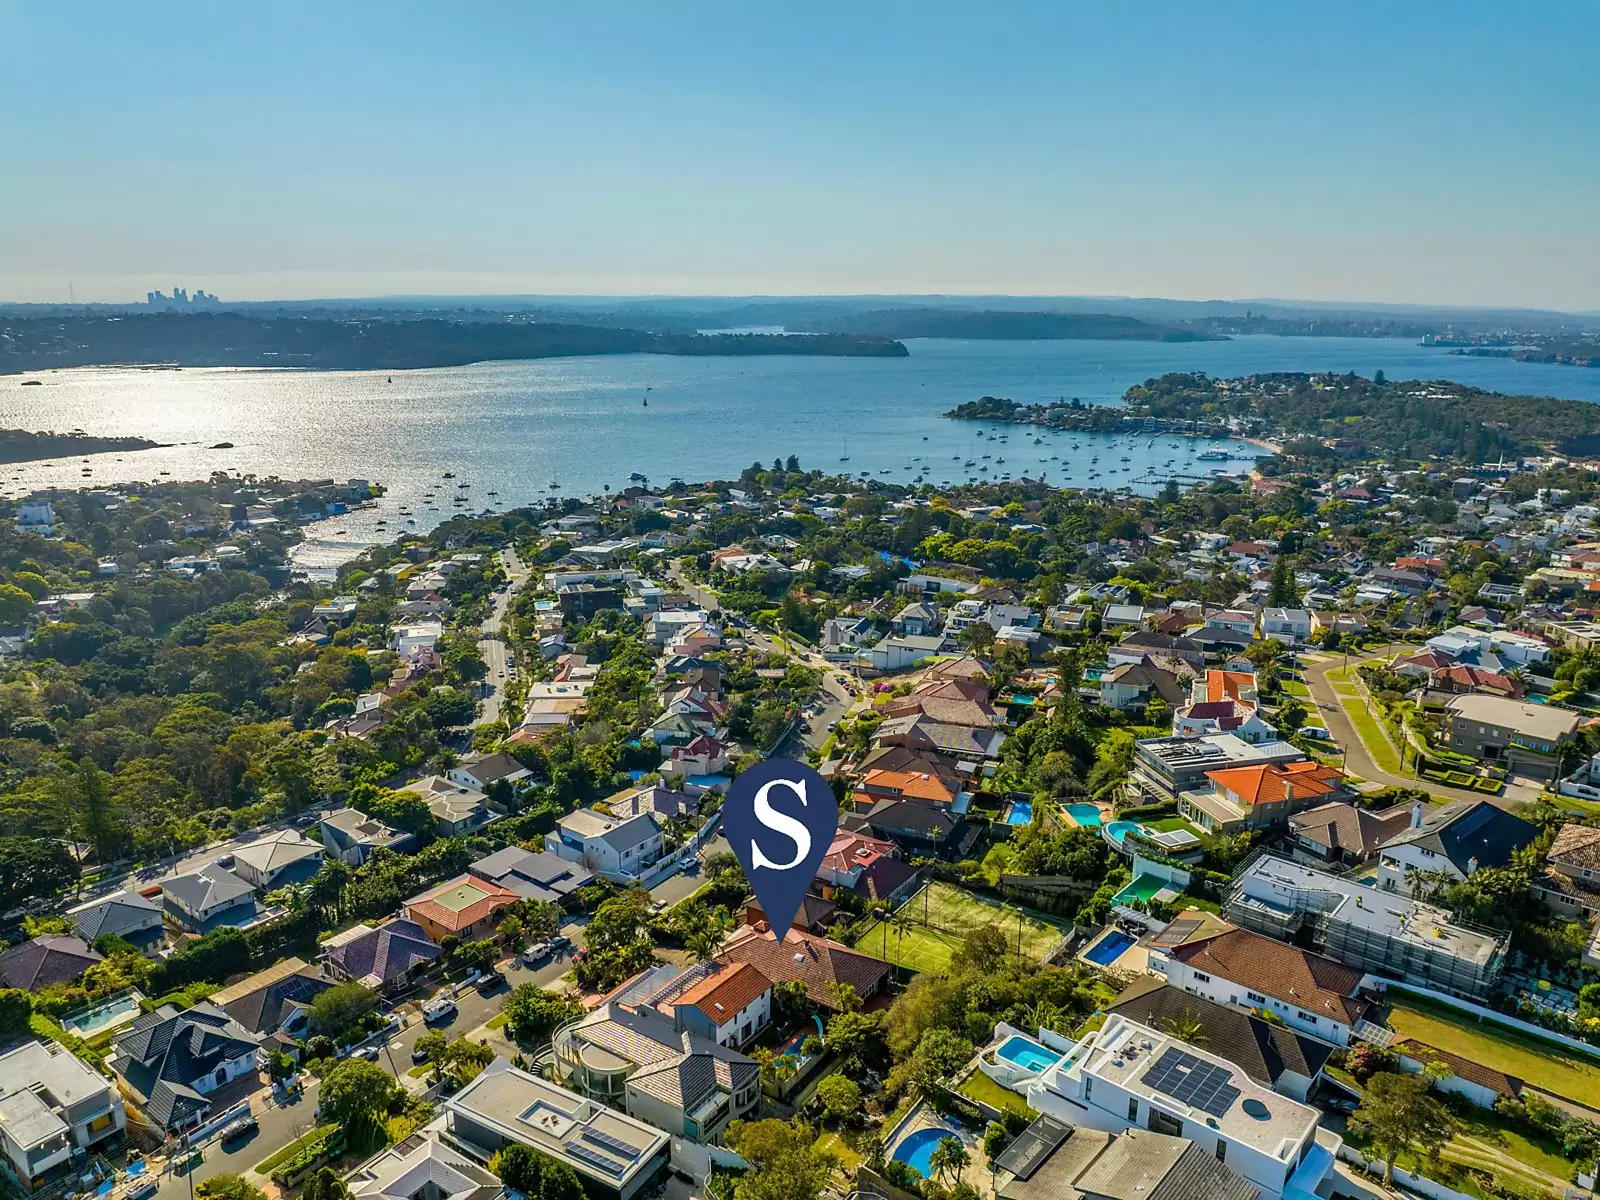 Photo #18: 23 Village High Road, Vaucluse - Sold by Sydney Sotheby's International Realty